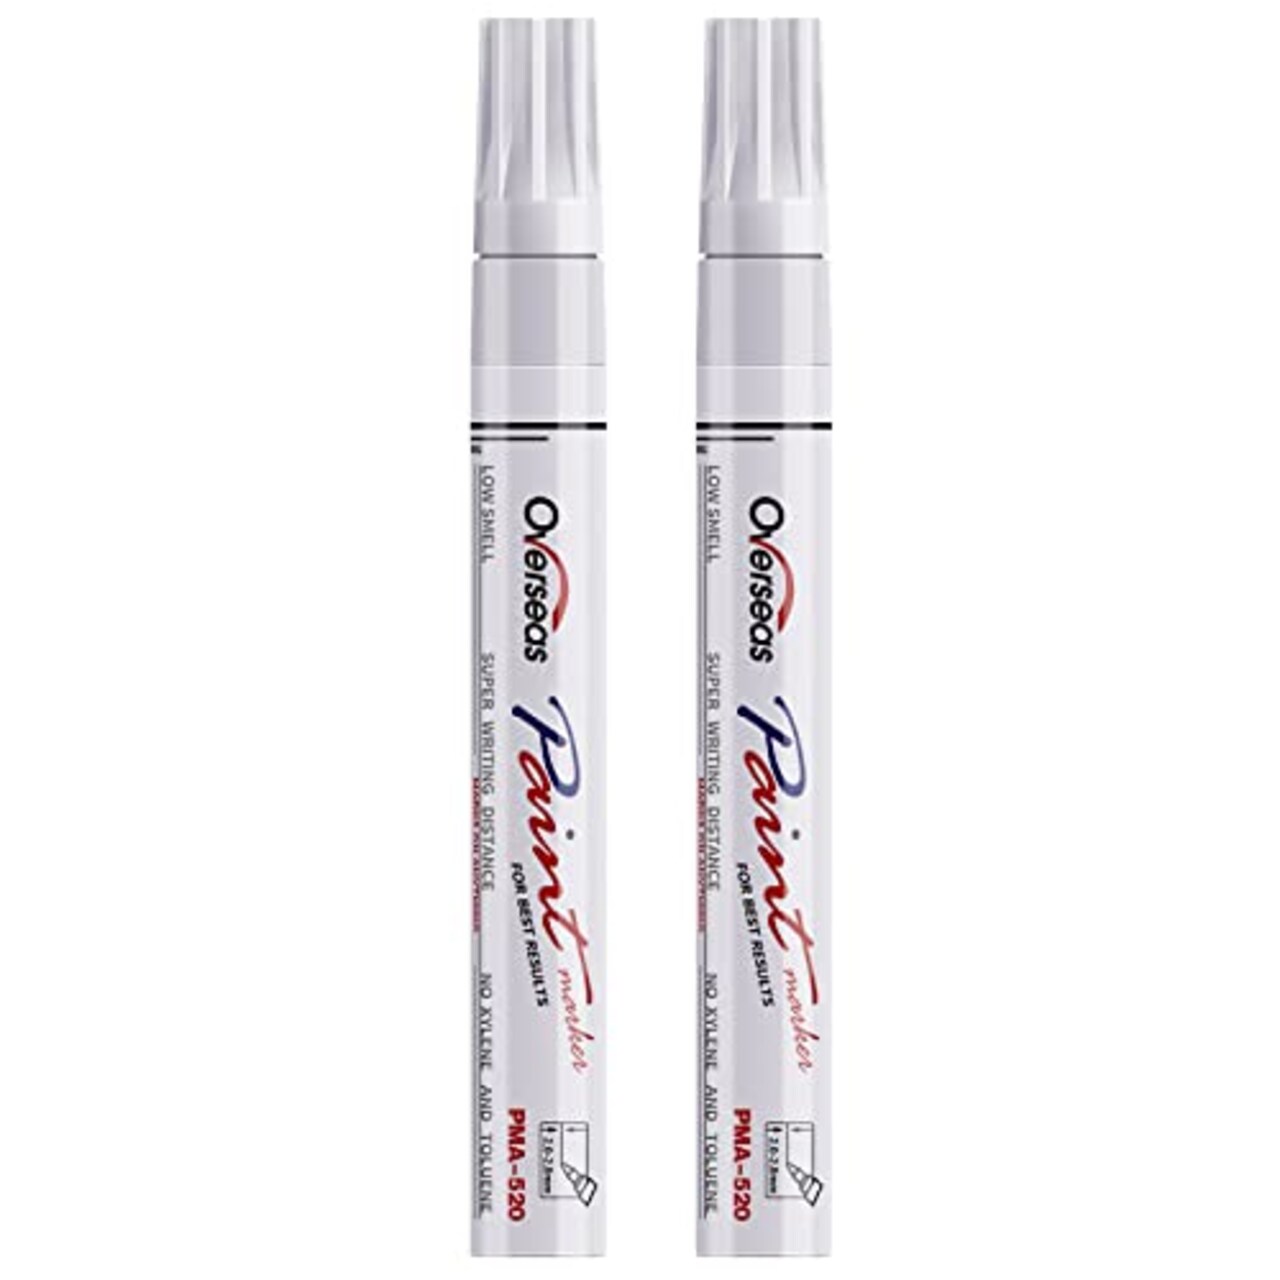 Permanent Paint Pens White Markers - 2 Pack Single color Oil Based, Medium  Tip, Quick Drying and Waterproof Marker Pen for Metal, Rock Painting, Wood,  Fabric, Plastic, Canvas, Mugs